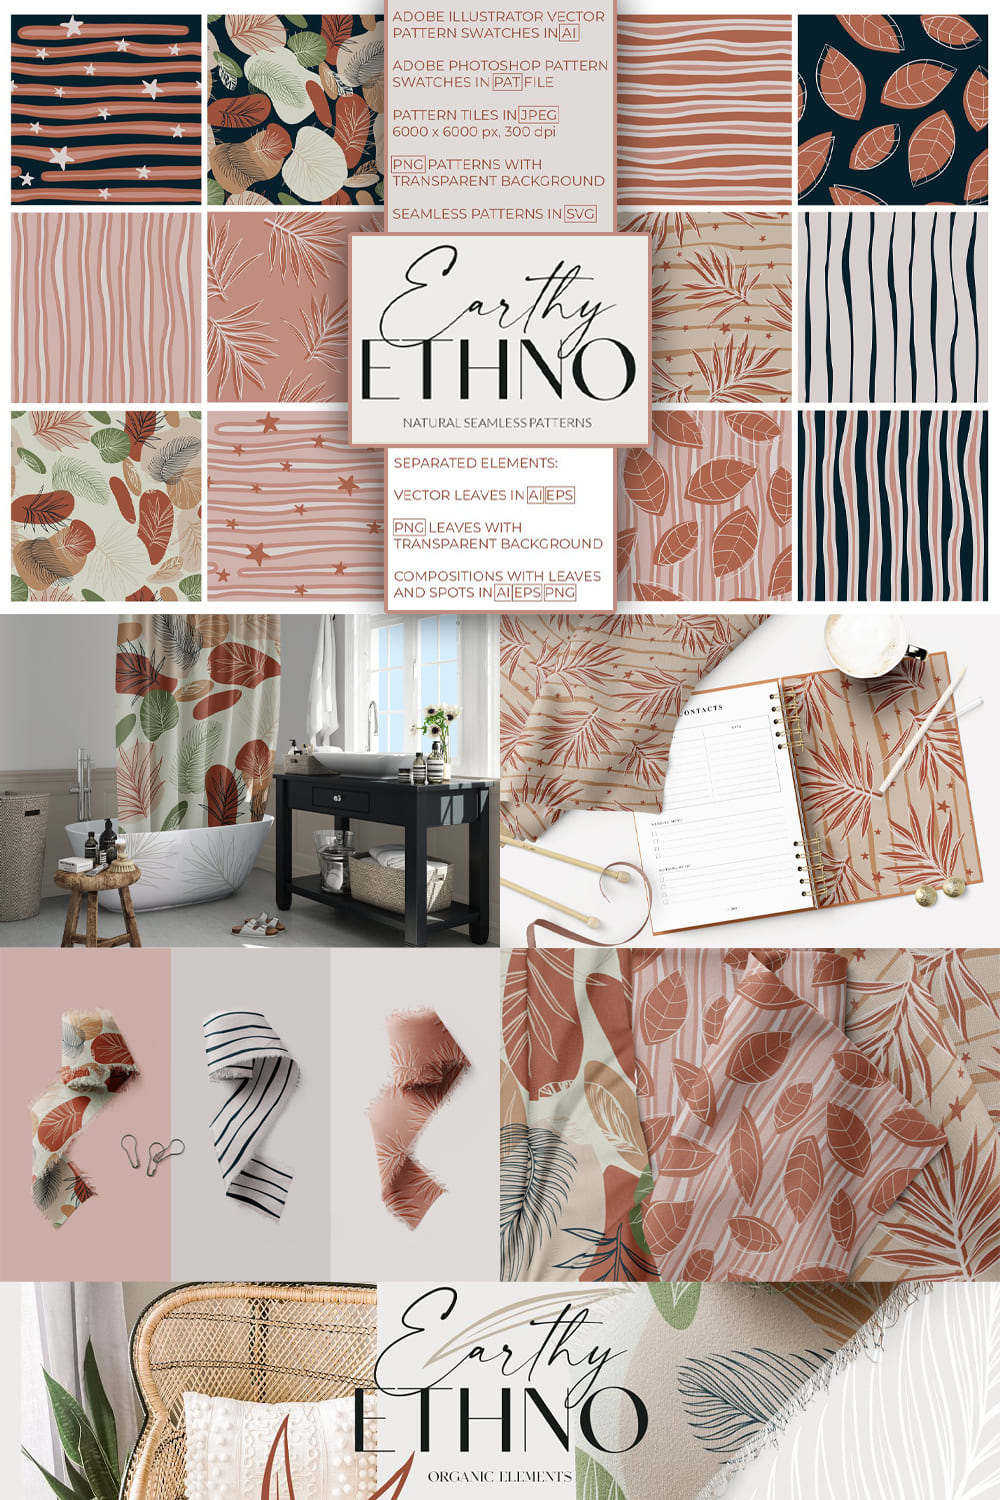 Earthy ethno seamless patterns - pinterest image preview.